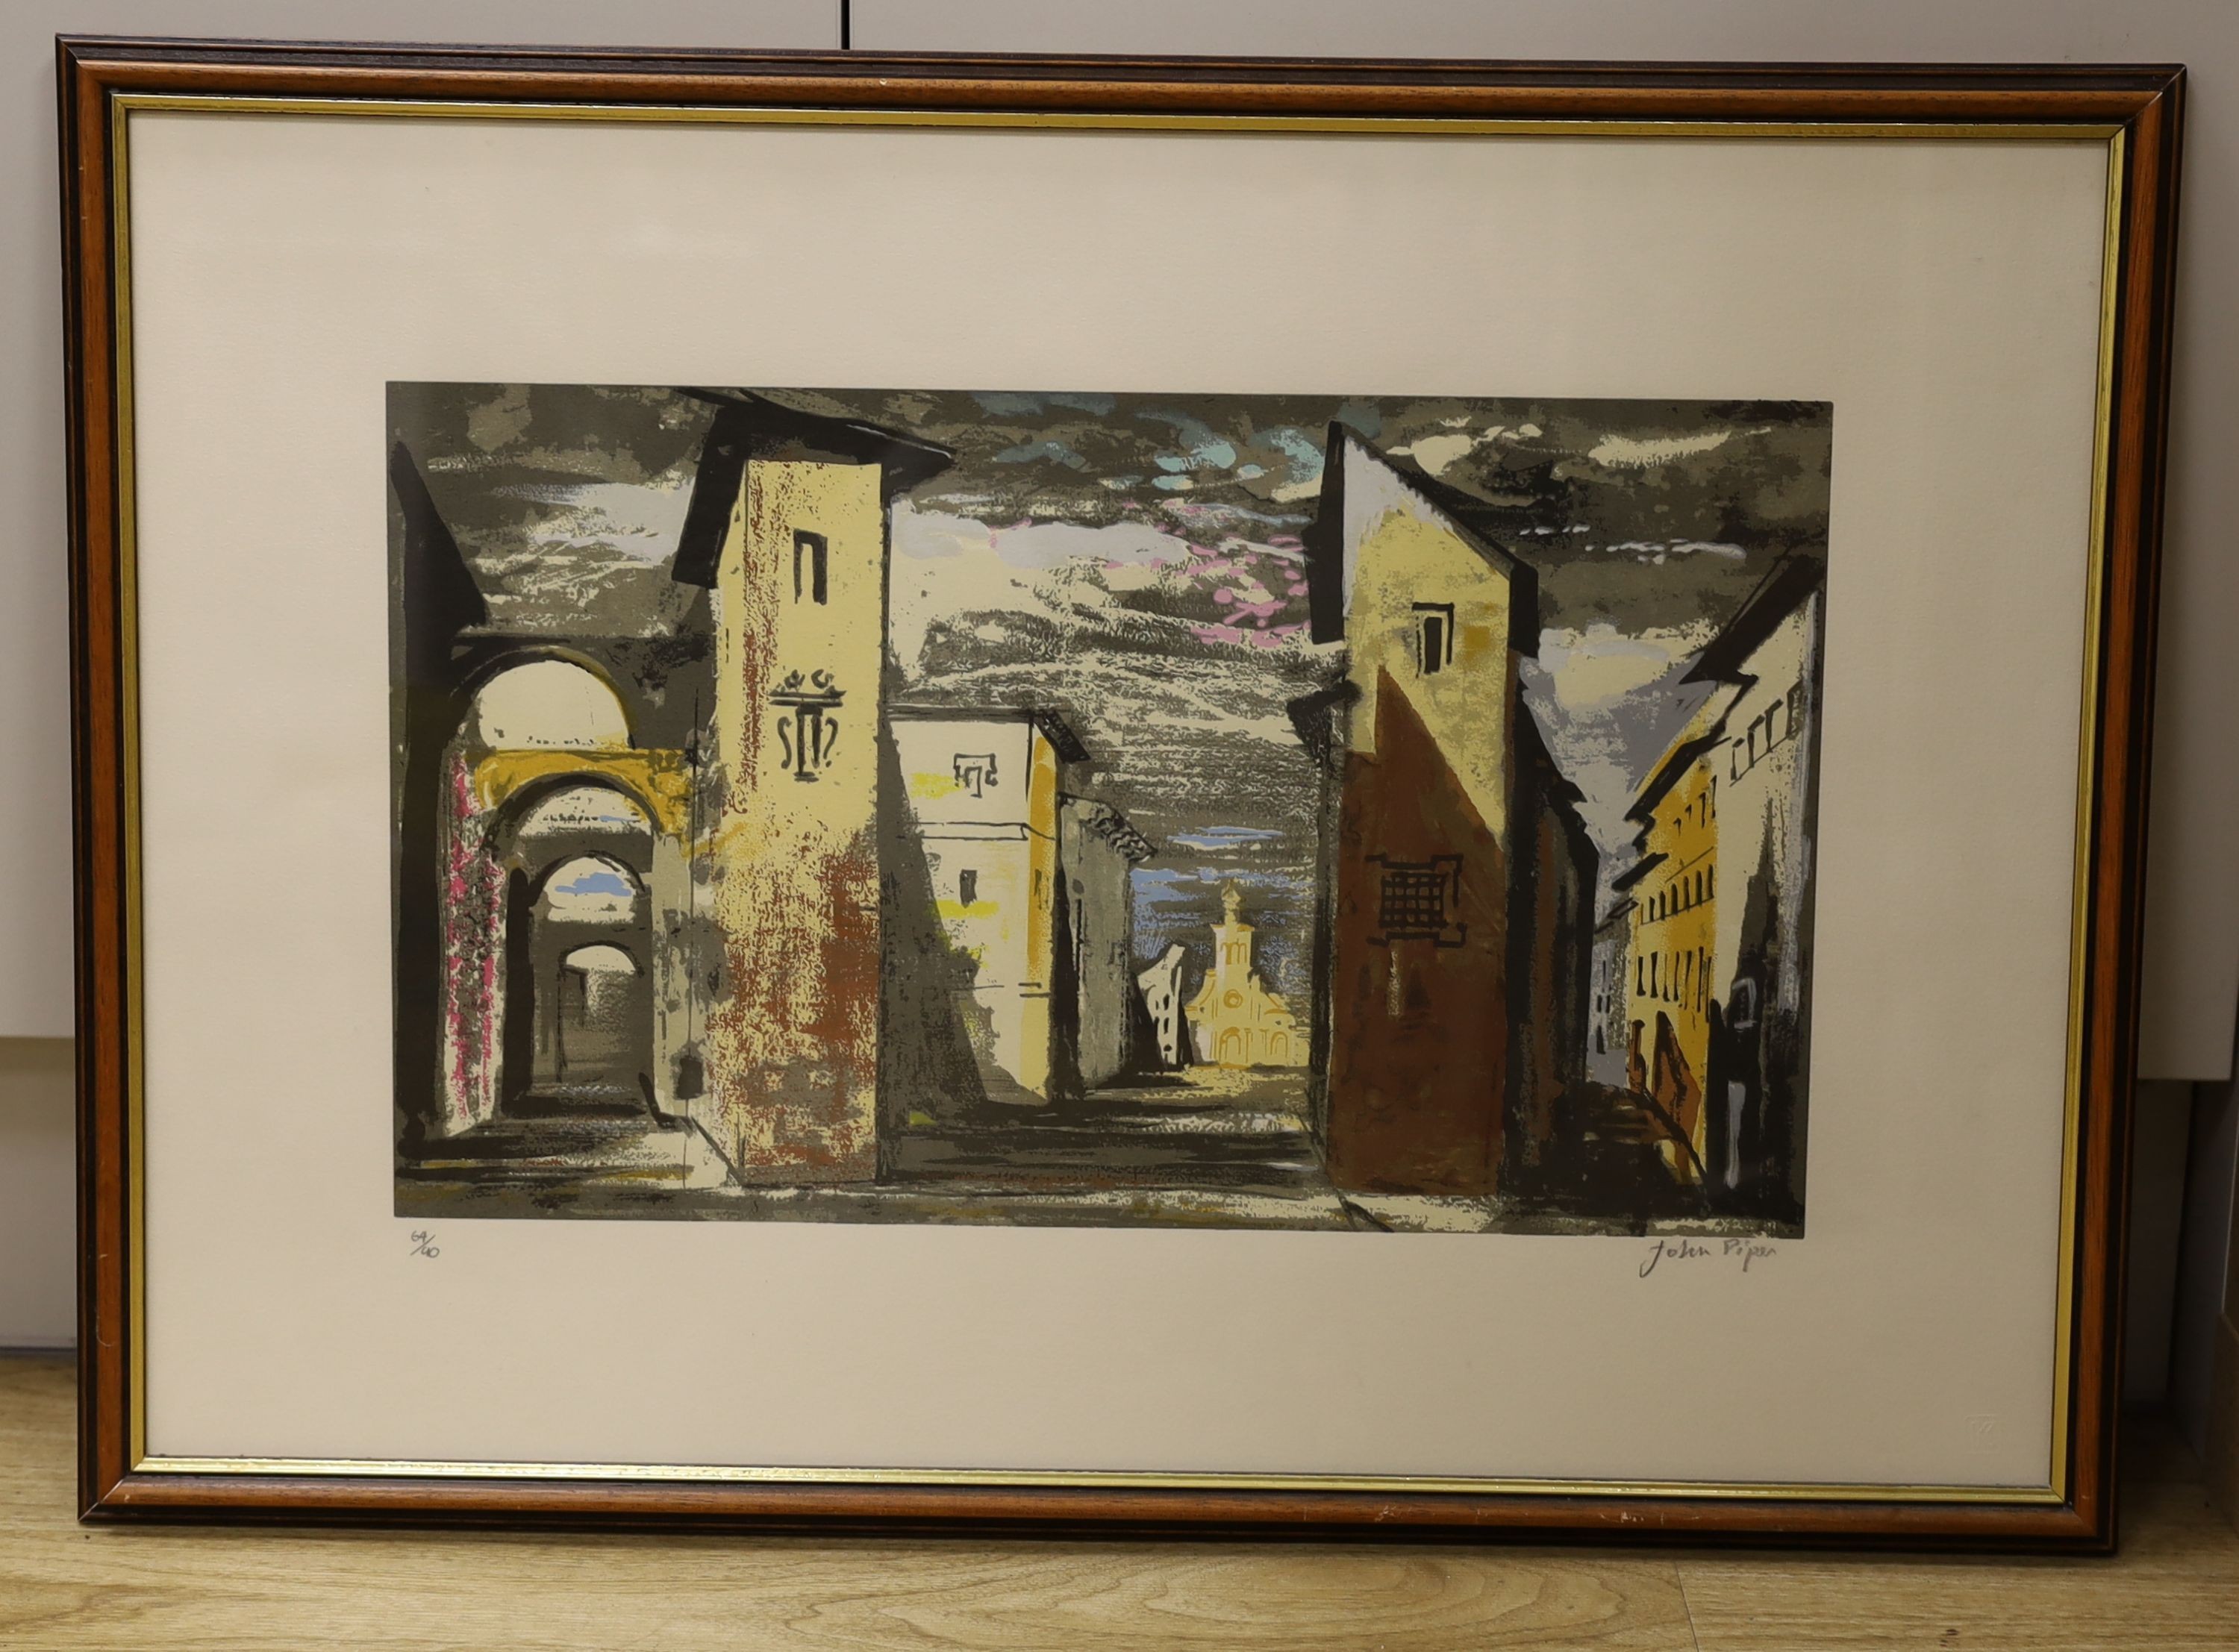 John Piper (1902-1993), limited edition print, street scene from Don Giovanni, signed in pencil, 64/90, 46 x 66cm